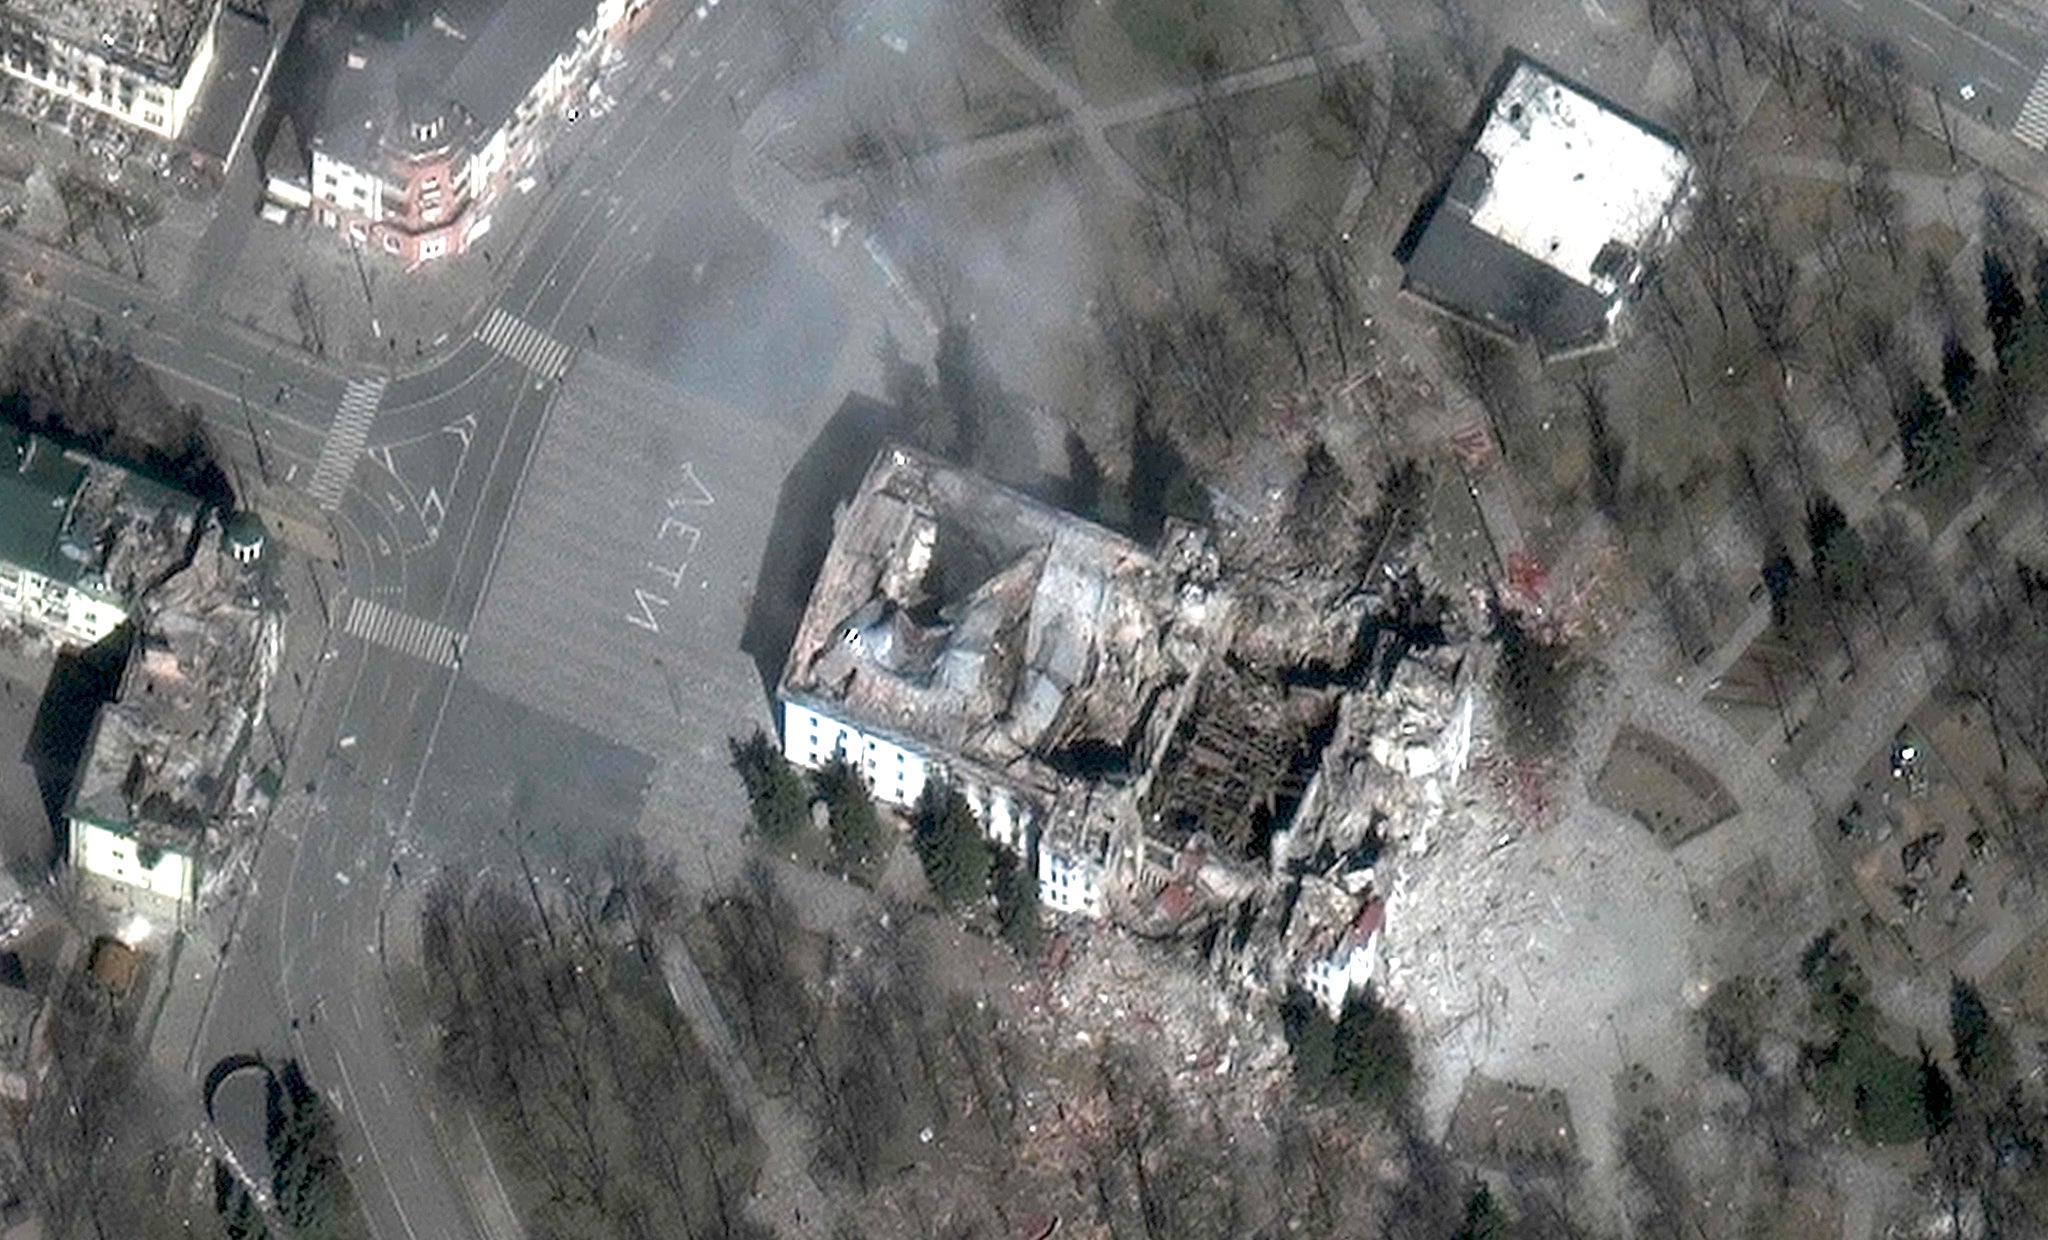 Damage to the Mariupol theatre and nearby buildings